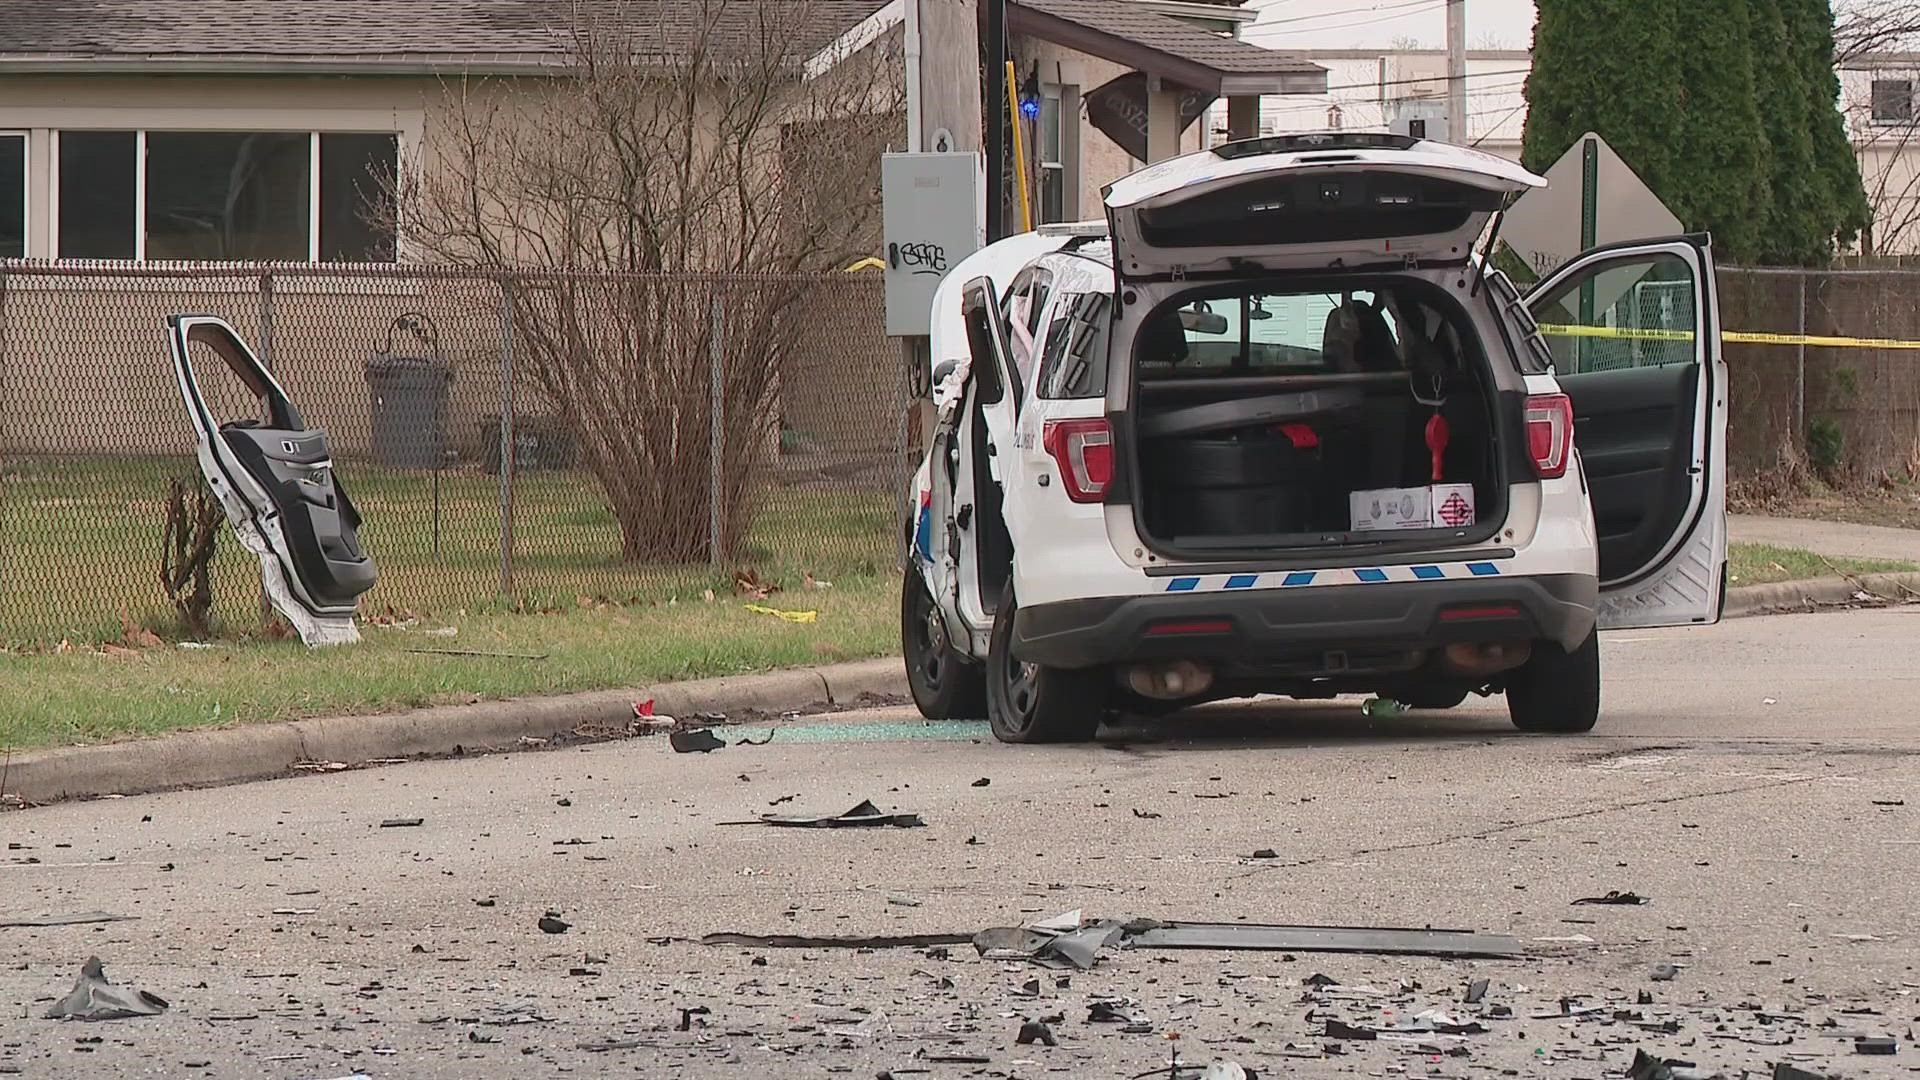 The police cruiser and the Kia suffered heavy damage from the crash. Police say a firearm was recovered at the scene.